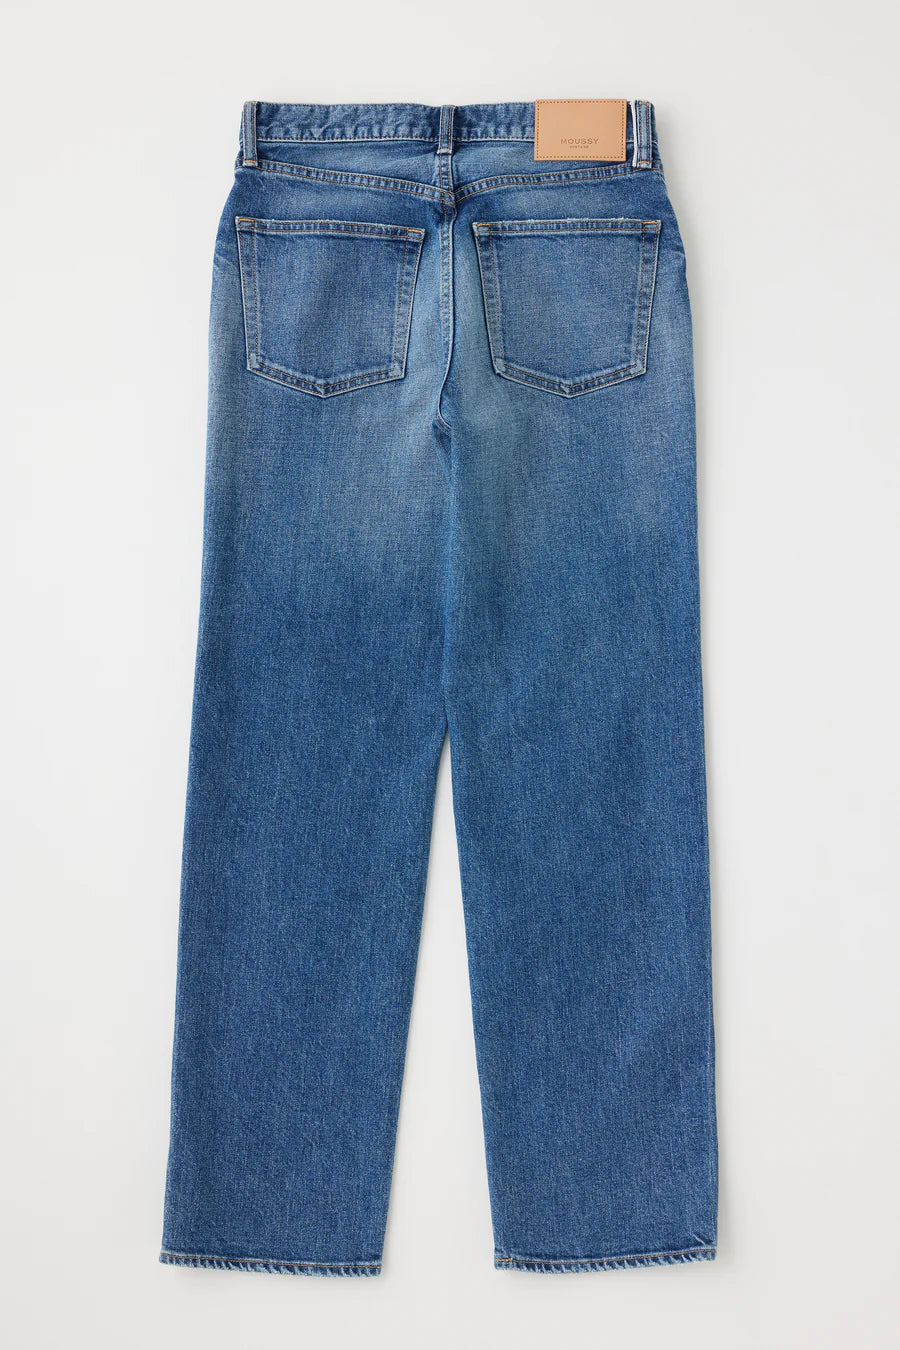 Moussy Vintage Willowen Straight Jeans